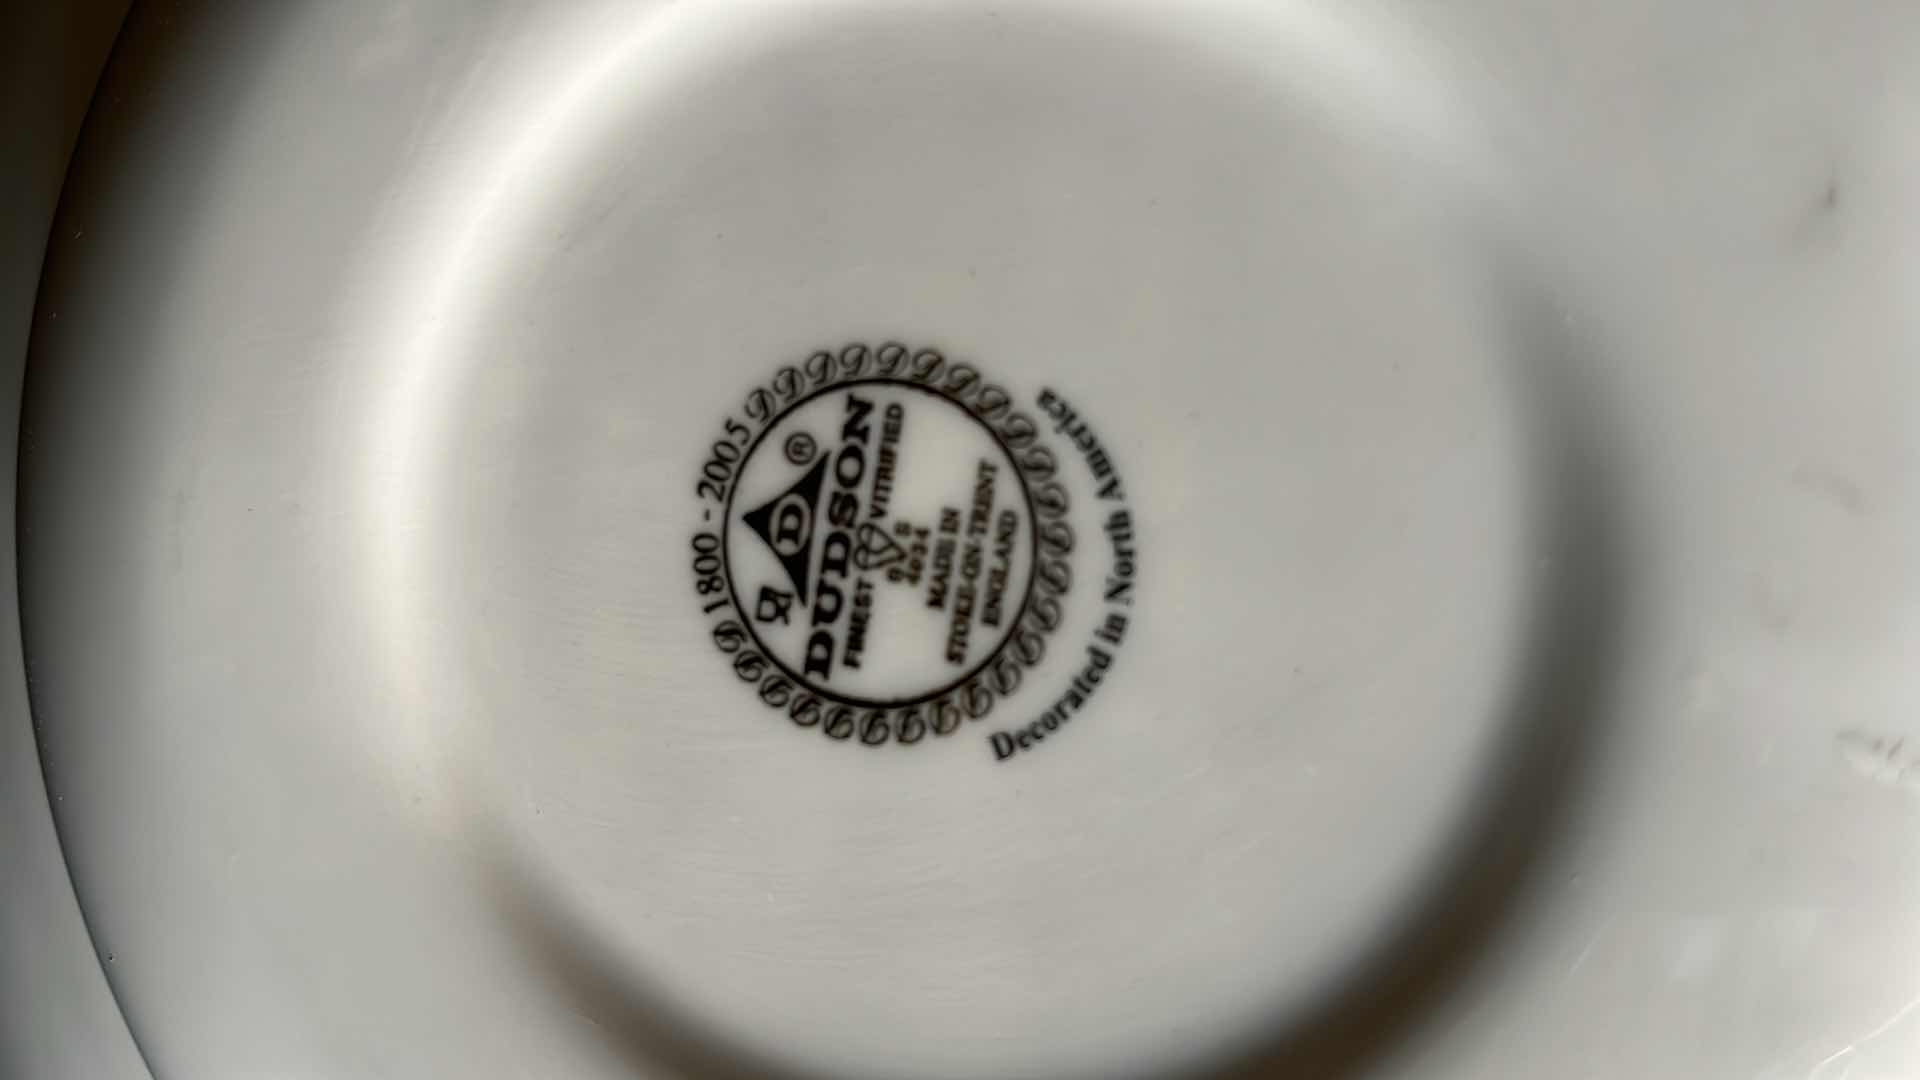 Photo 6 of DUDSON FINEST VOODOO SERVING BOWLS AND SERVING PLATES (SETS OF 4)